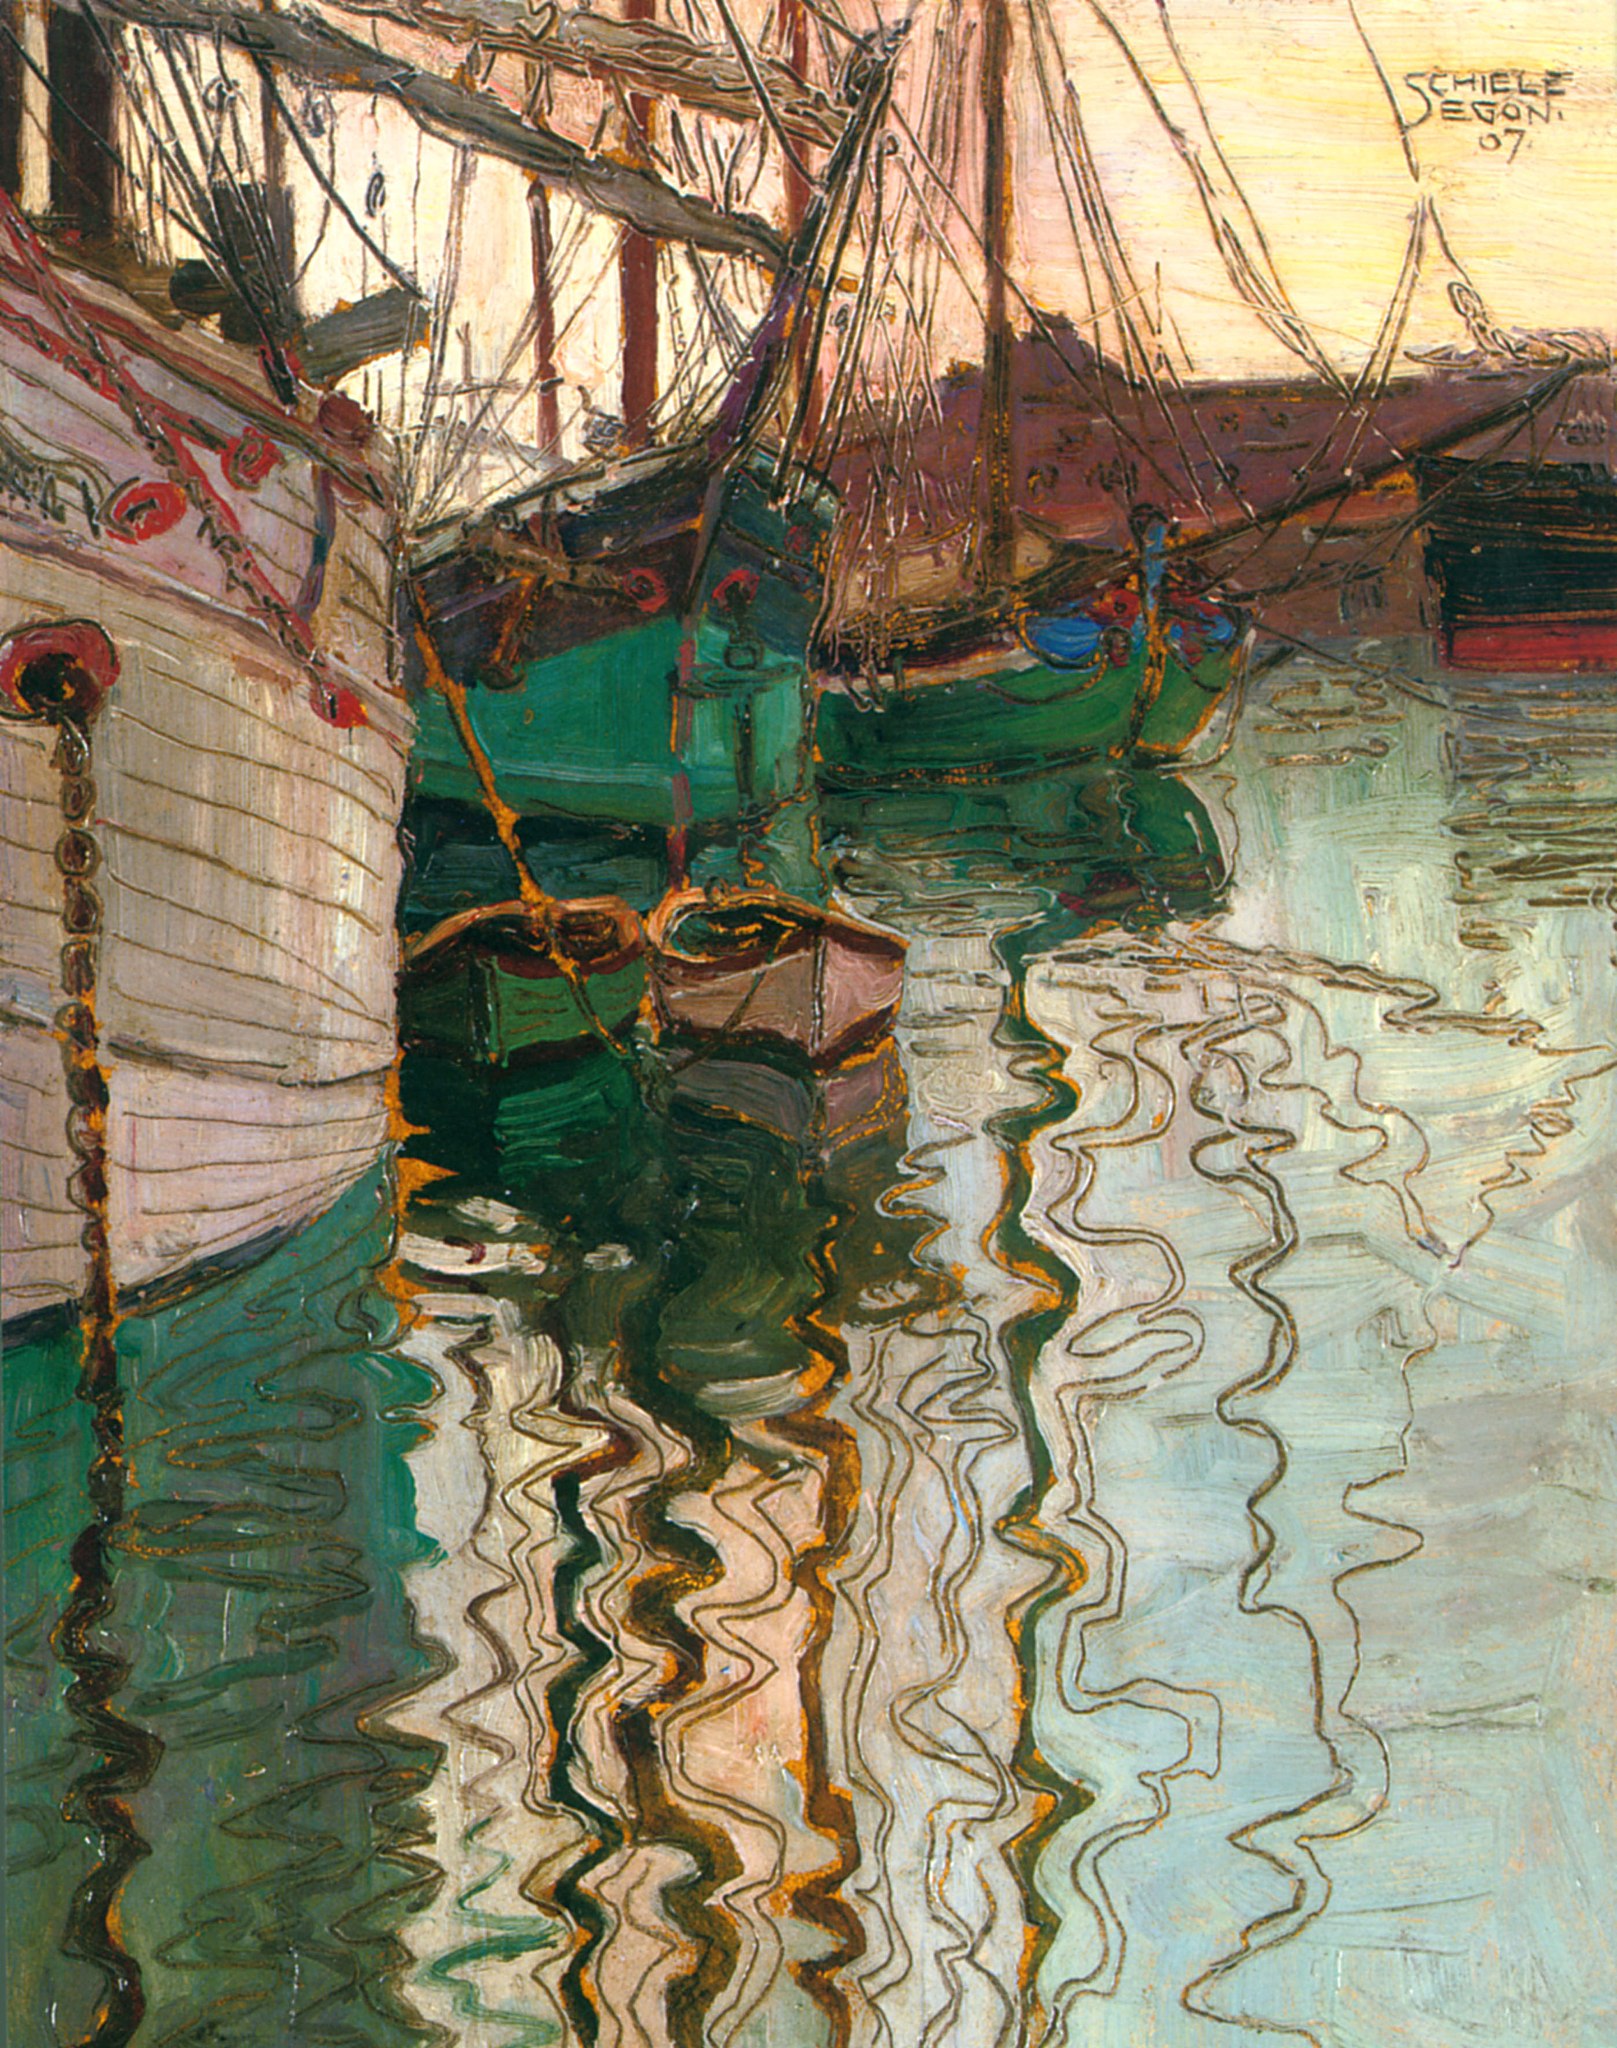 Port of Trieste by Egon Schiele - 1907 - 24.6 x 18 cm private collection